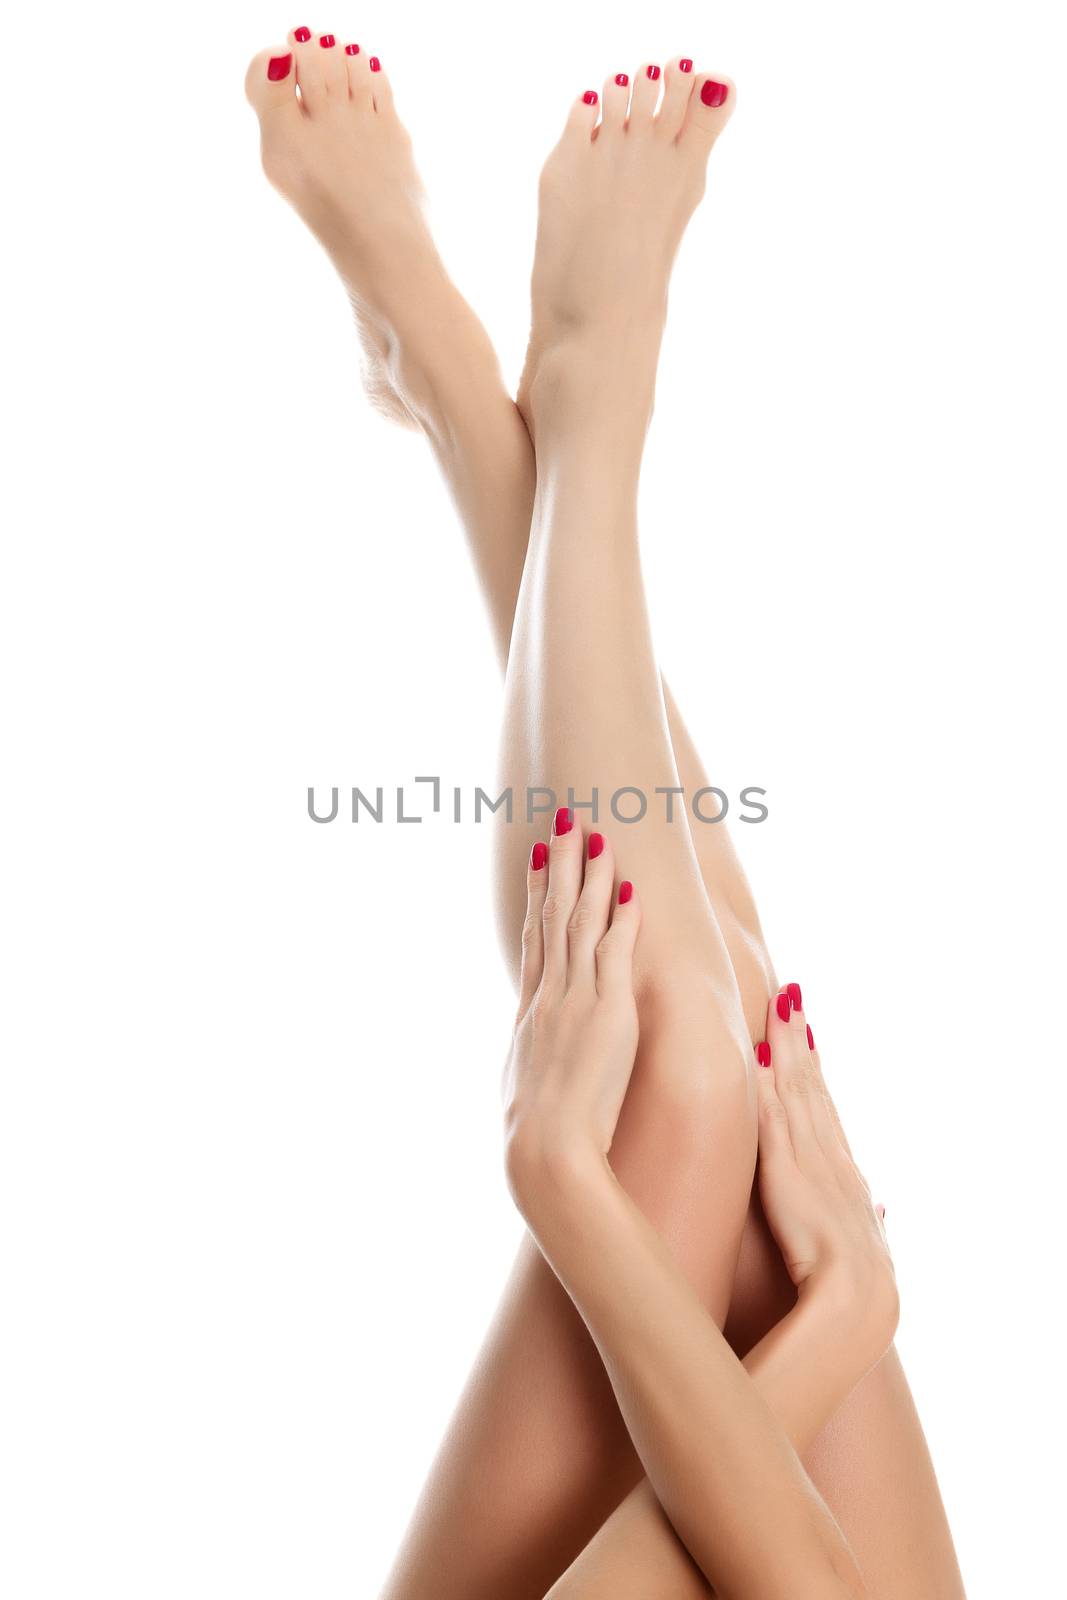 Female legs and hands against a white background by Nobilior